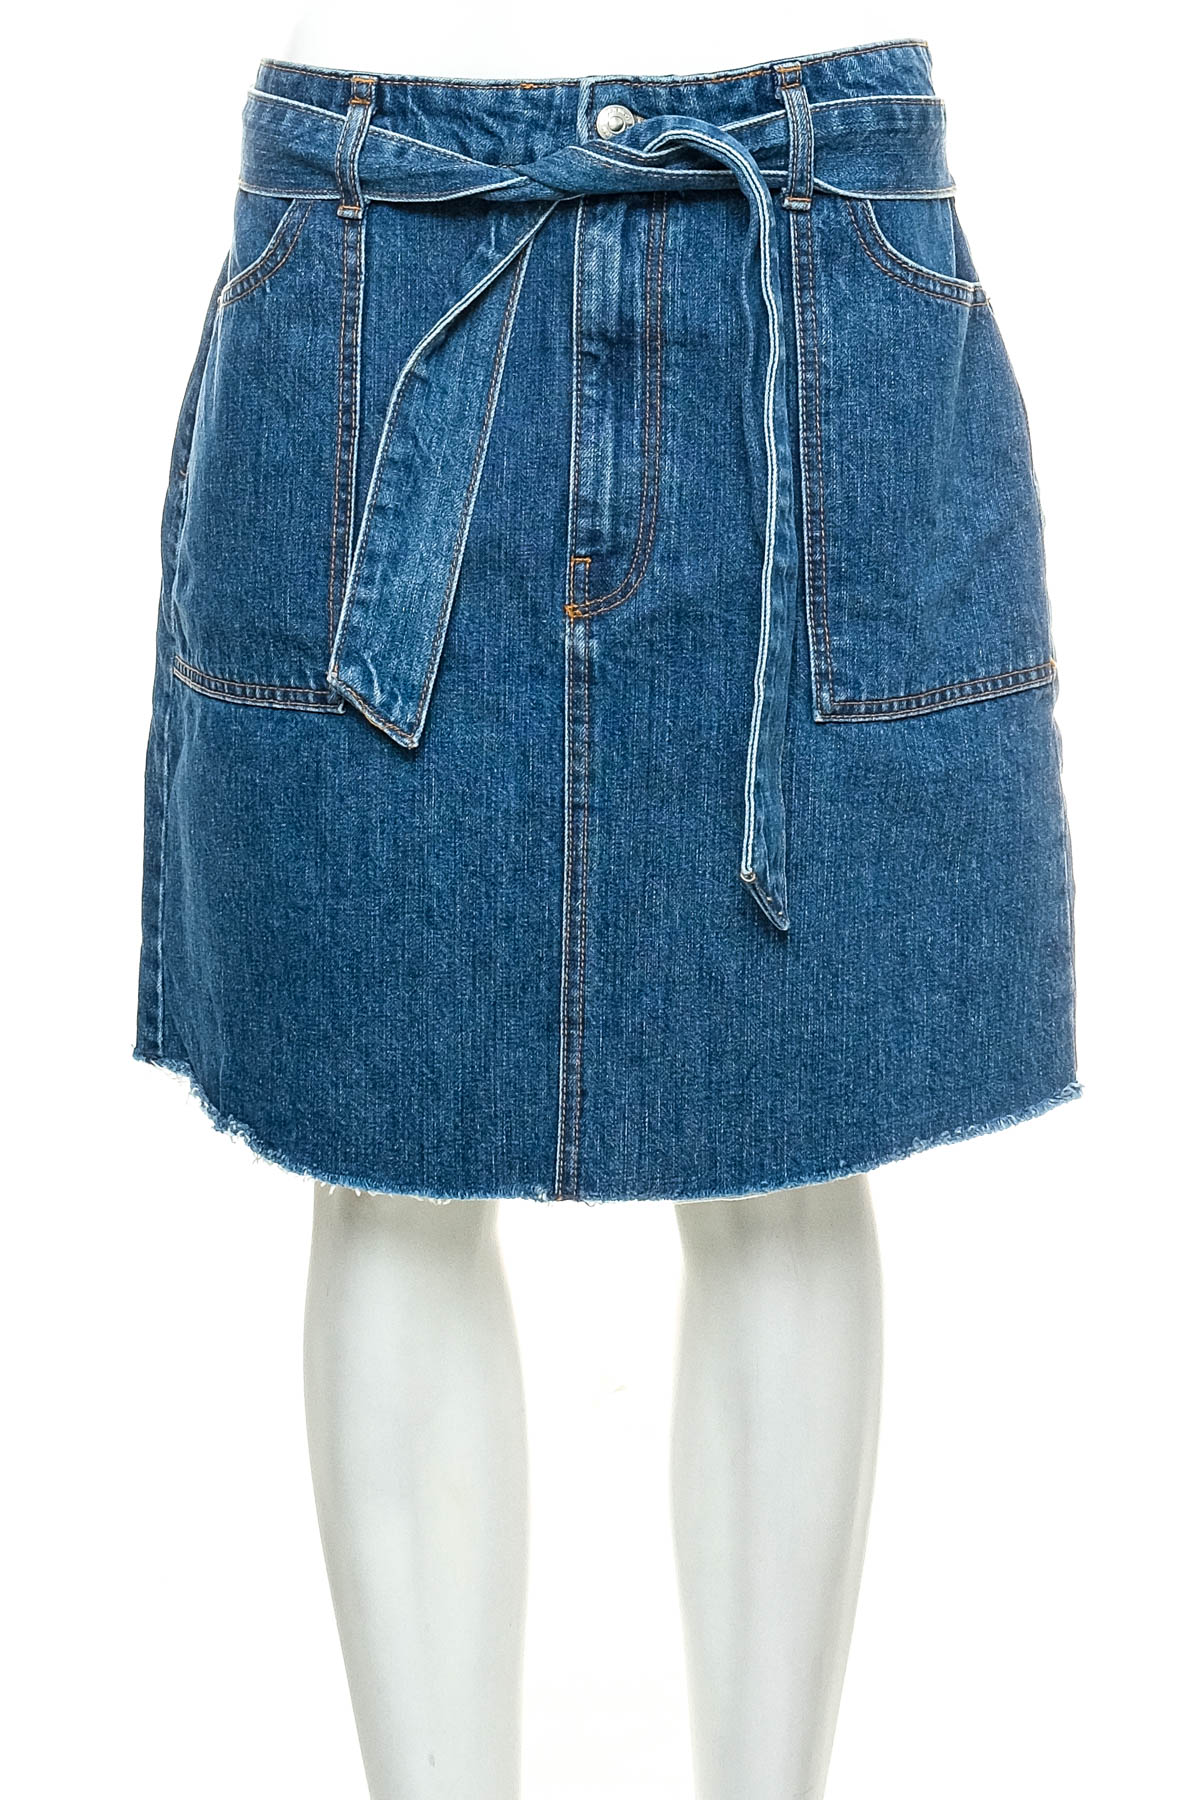 Denim skirt - G perfect jeans by Gina Tricot - 0